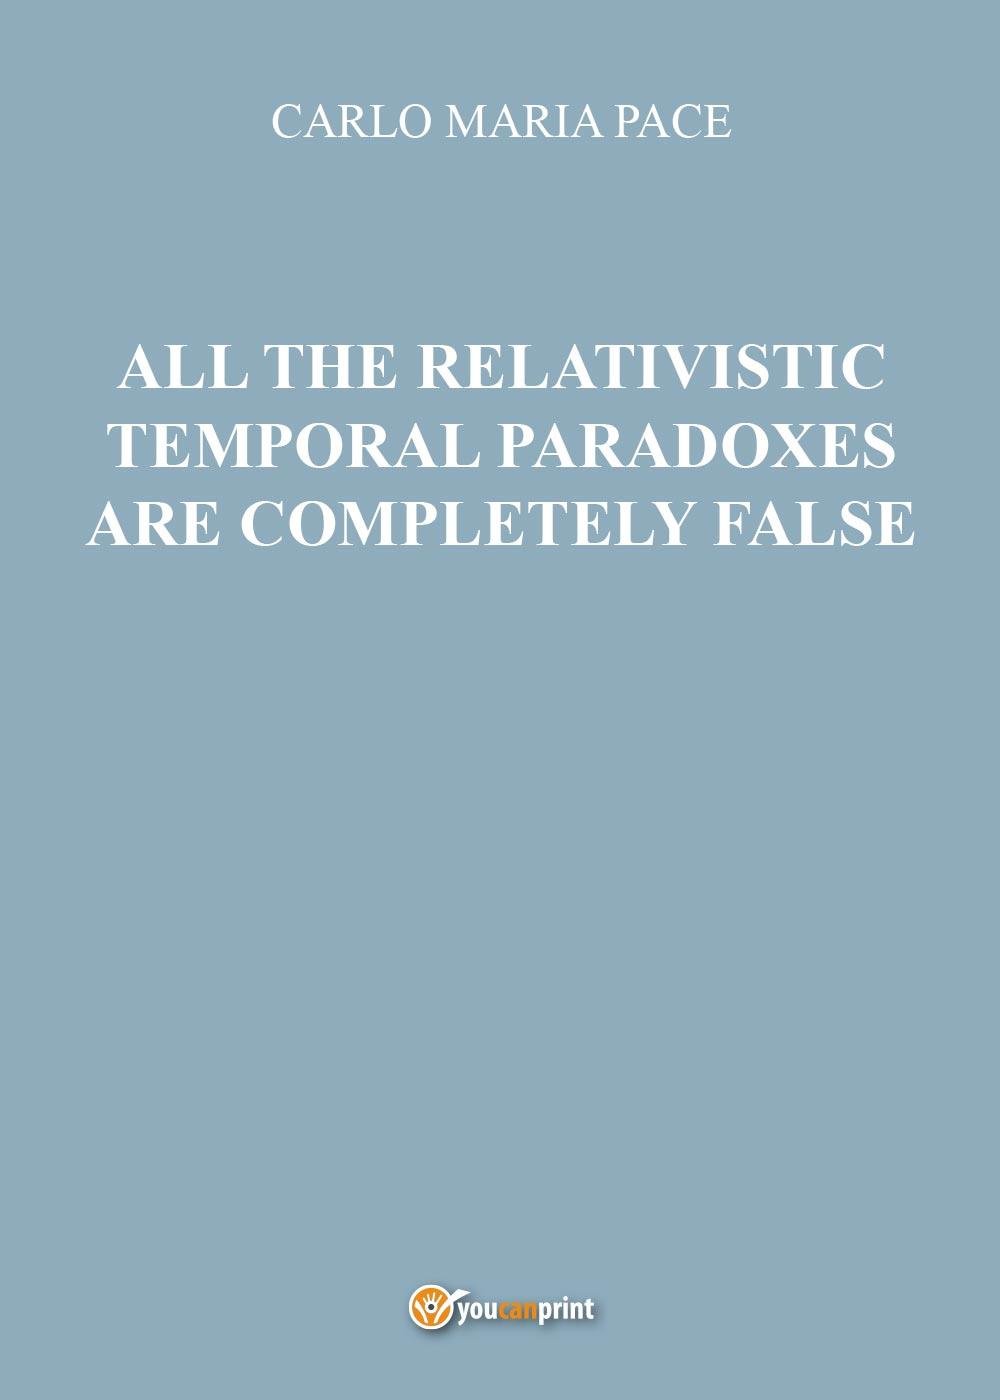 All the relativistic temporal paradoxes are completely false